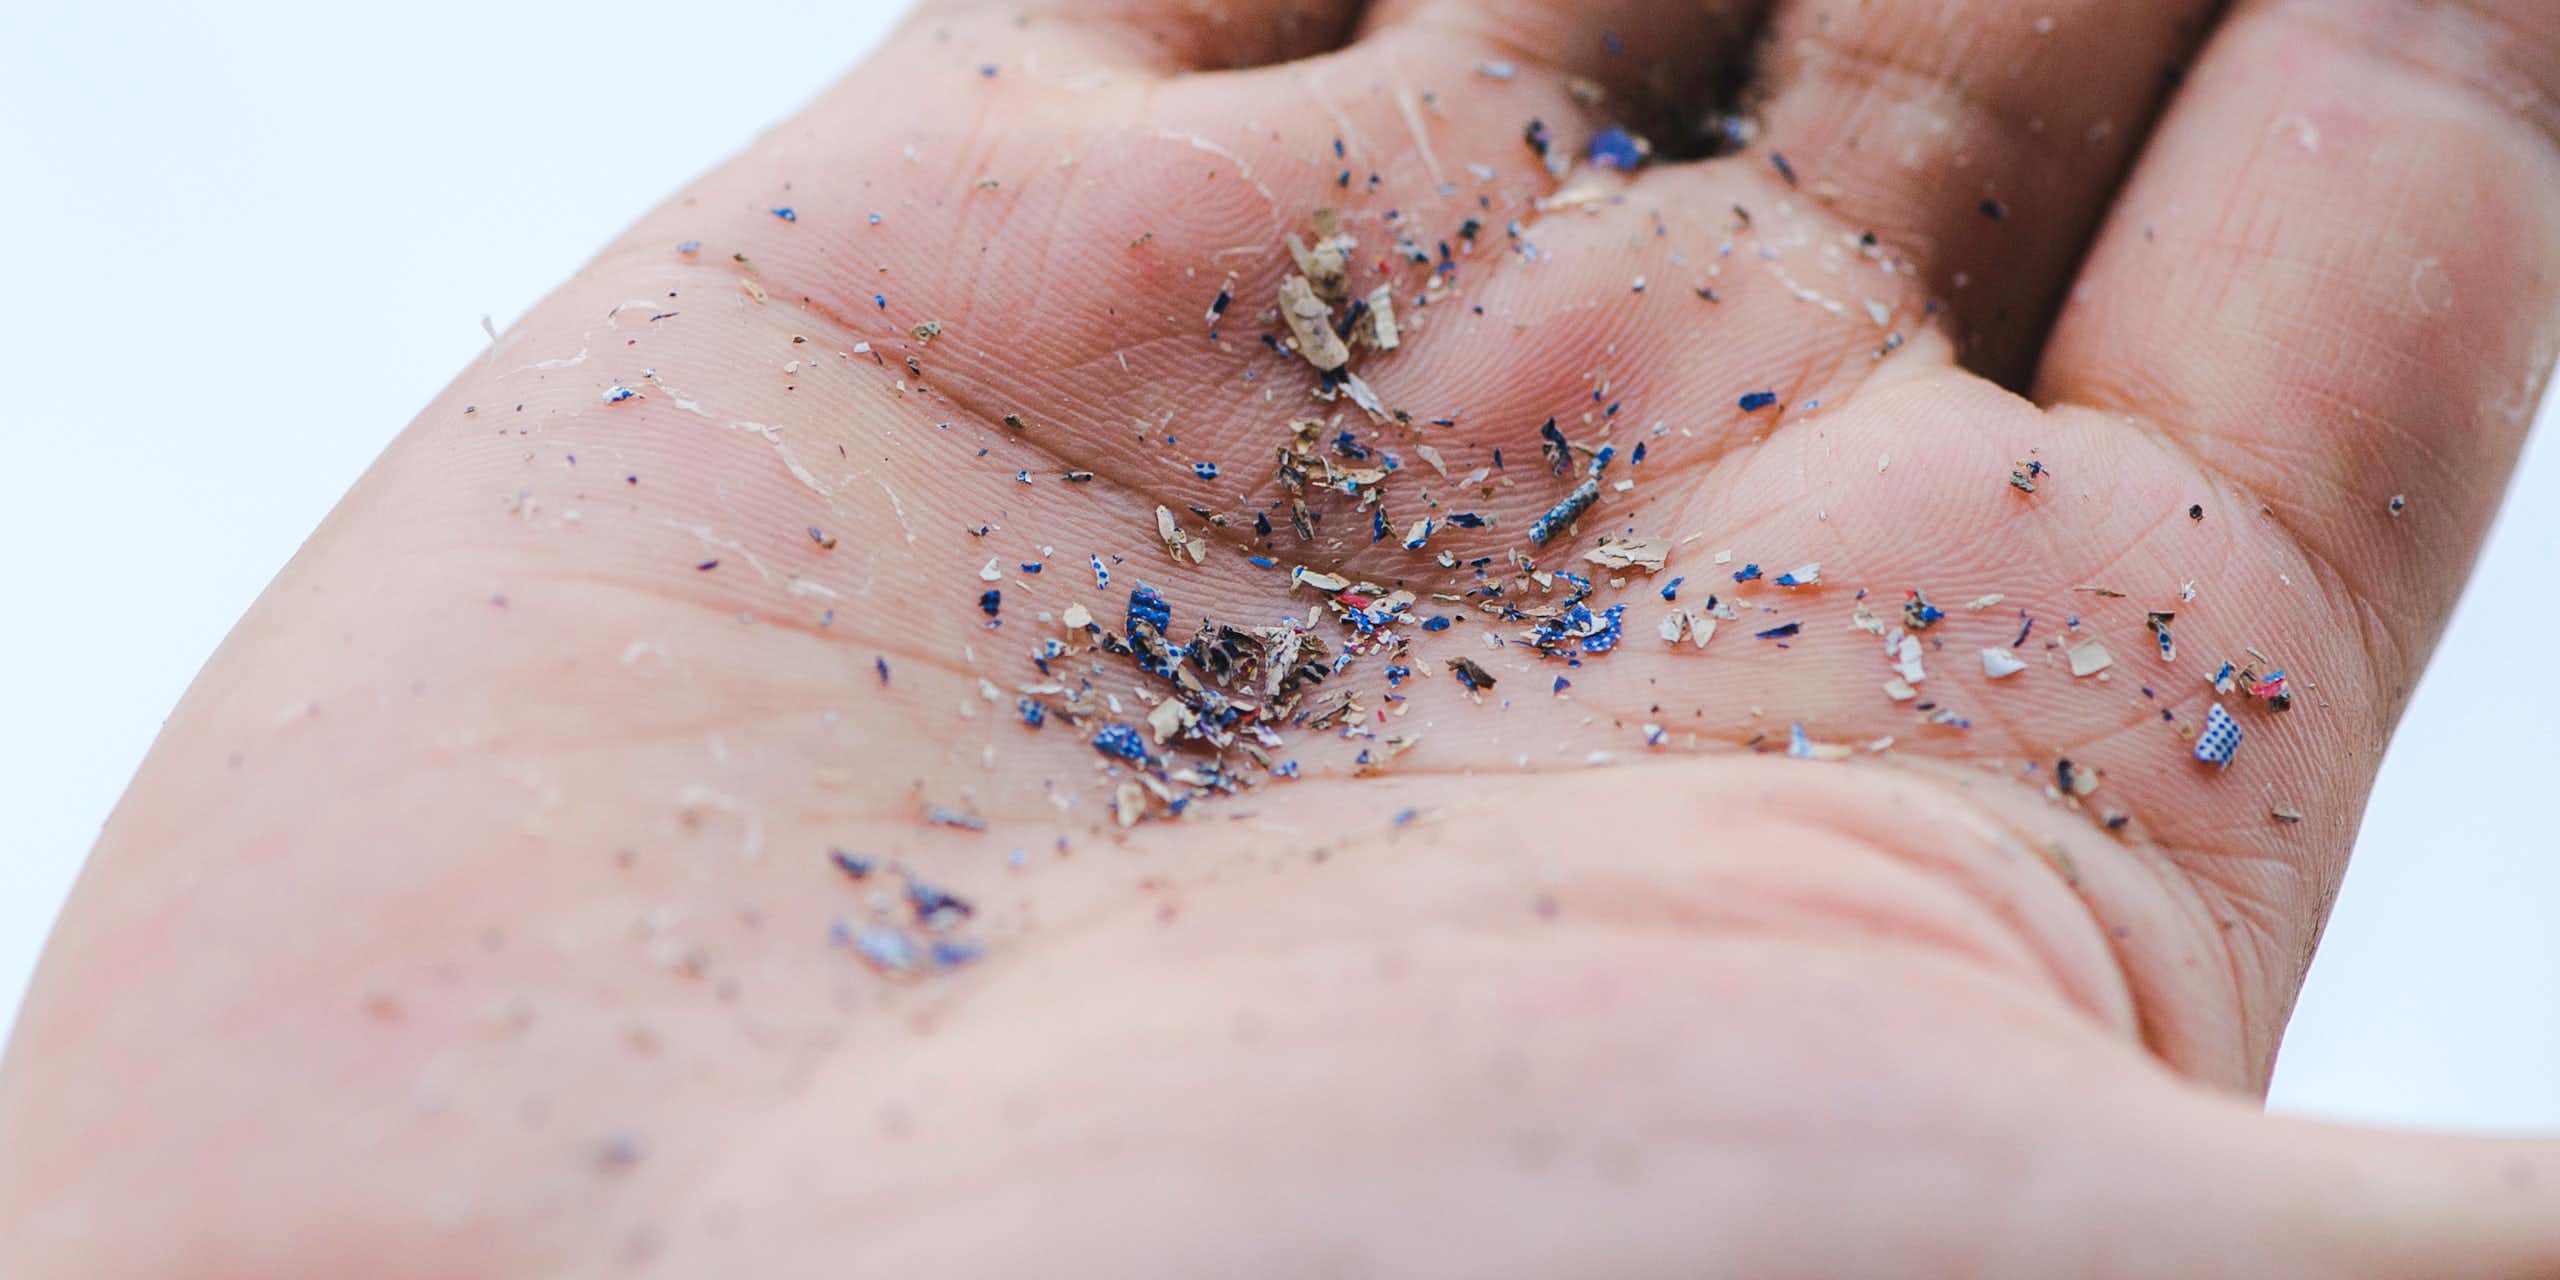 A close-up picture of a person's hand. In their palm they hold fragments of microplastics.